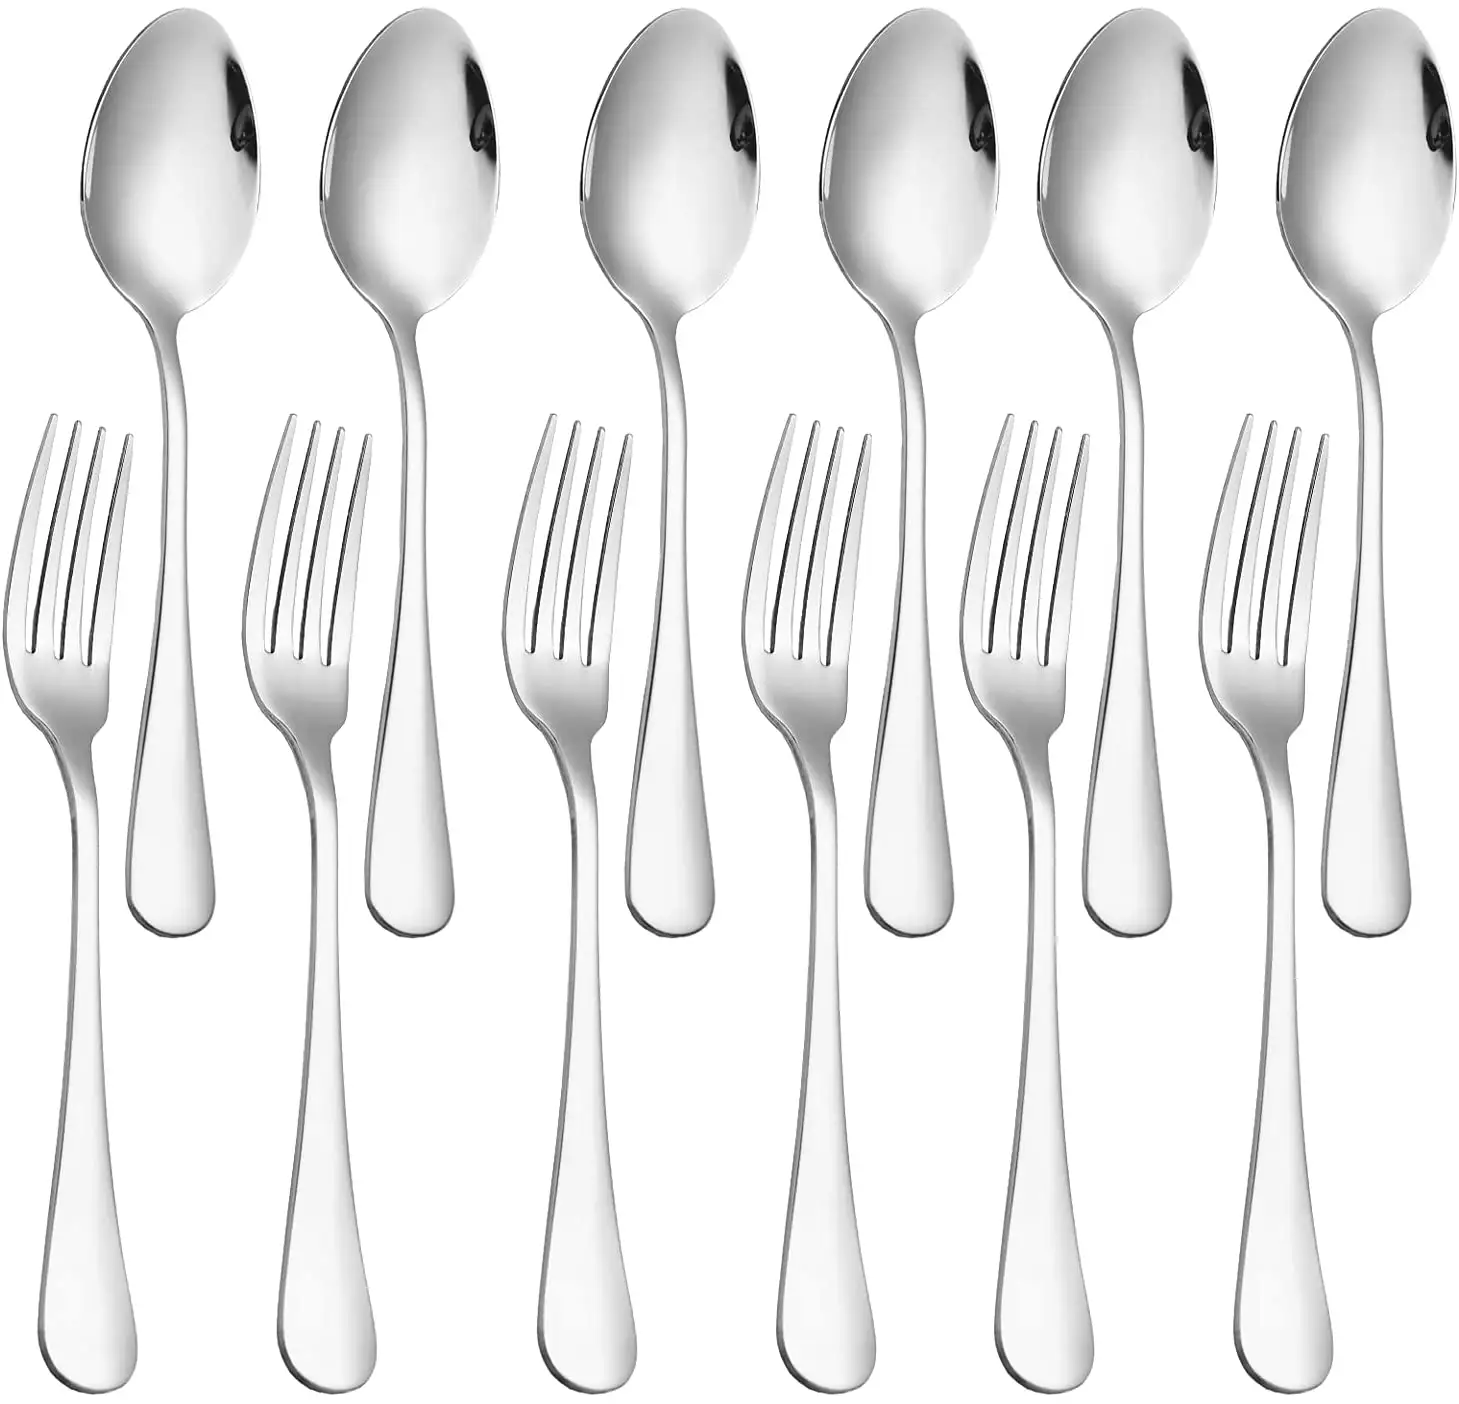 New Hot Sell Dinner Forks and Spoons Silverware Set of 12 Stainless Steel Forks and Spoons